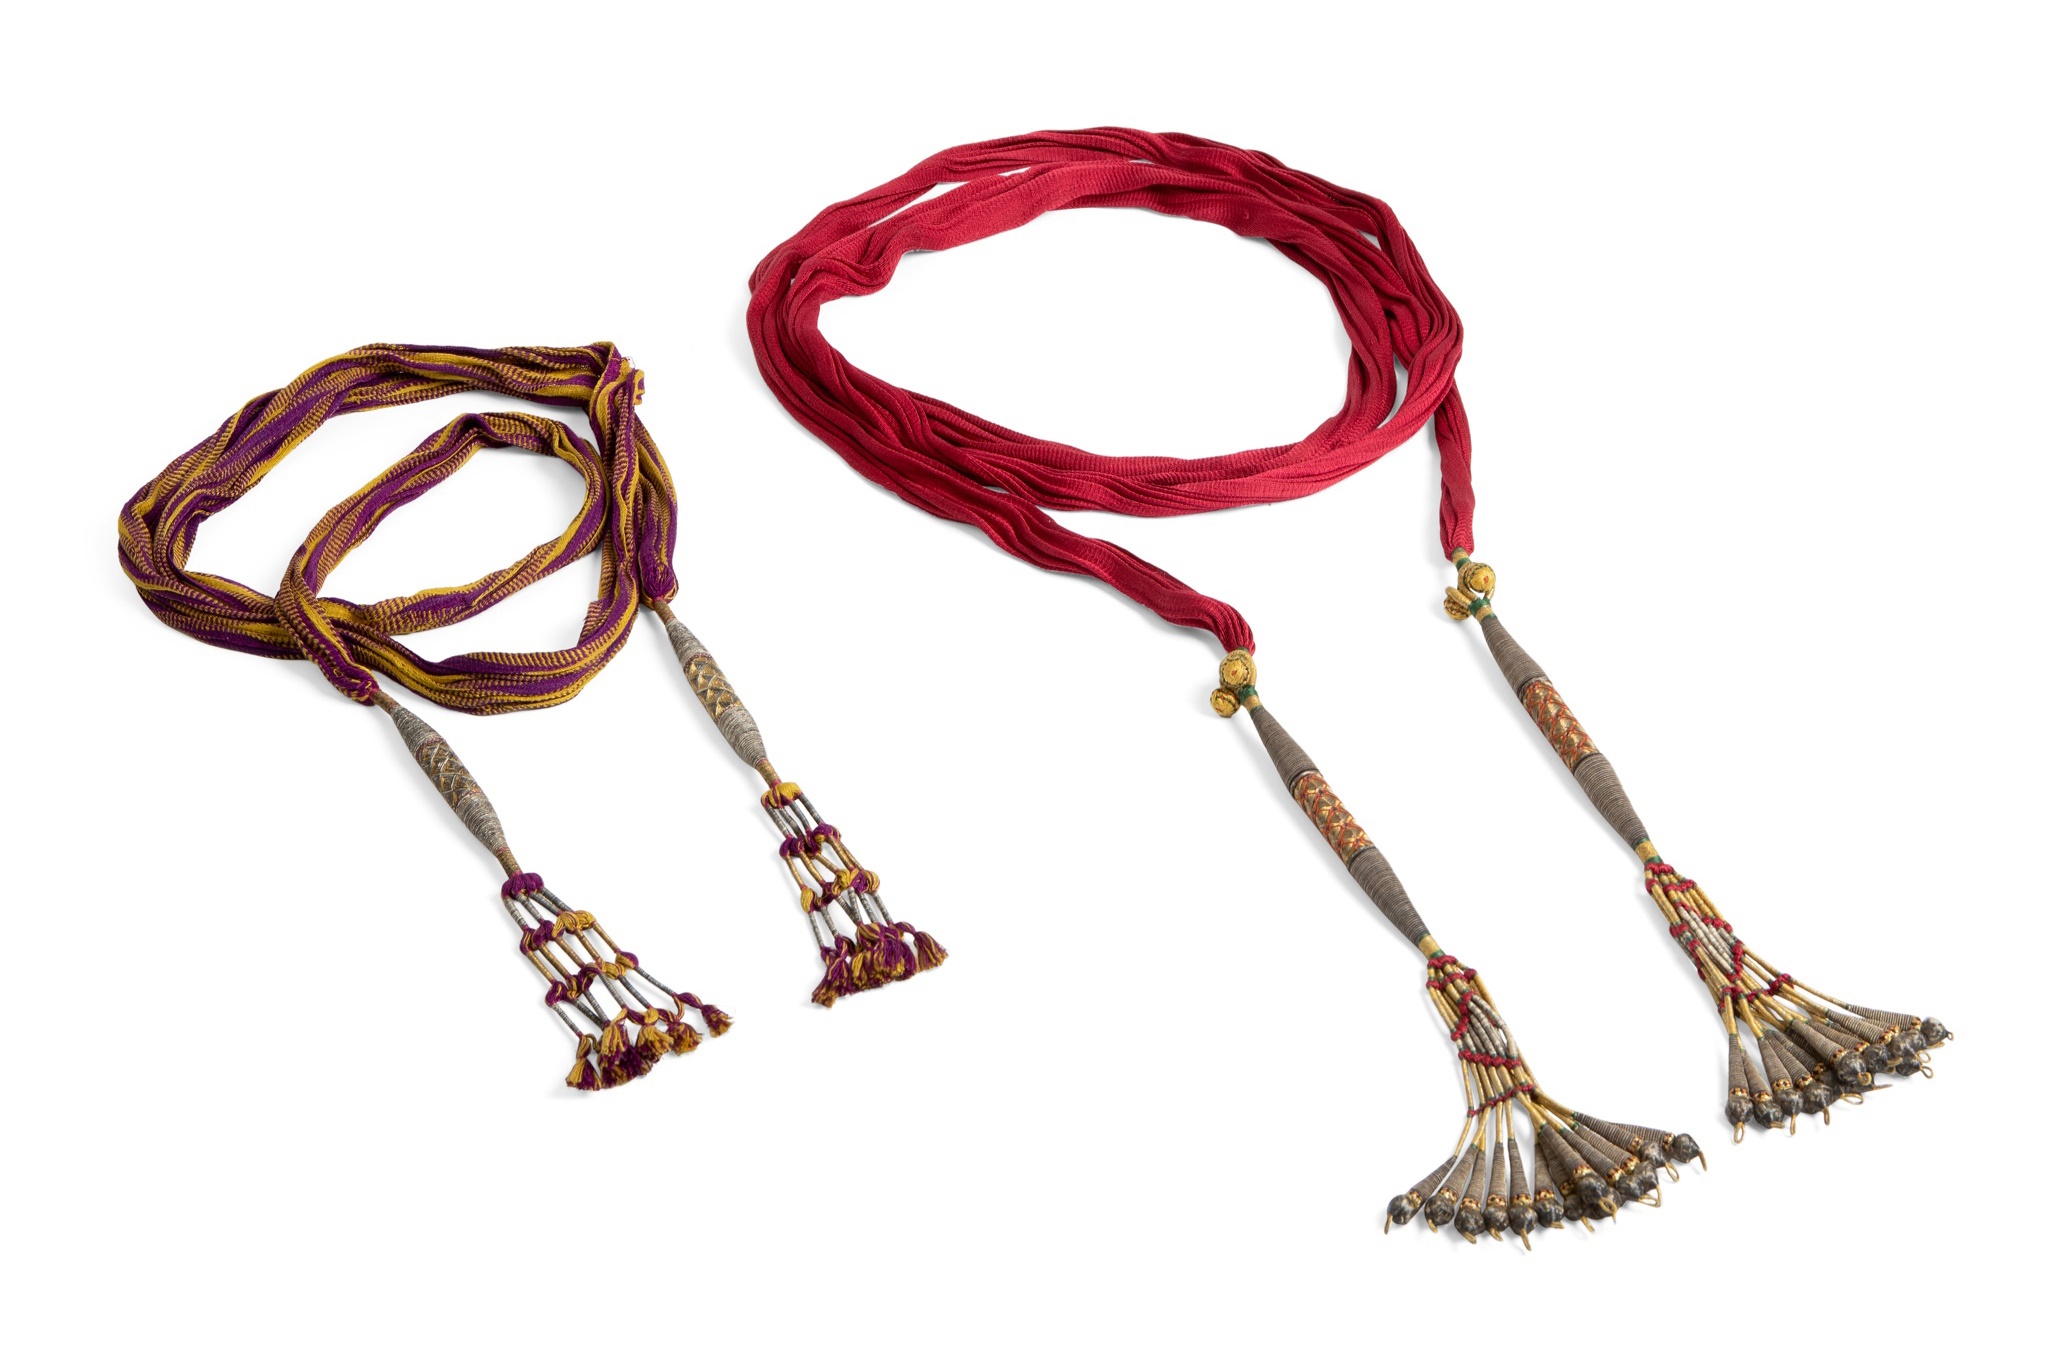 PROPERTY OF MAHARAJAH DULEEP SINGH (1838-93) THE LAST SIKH KING TWO SILK AND GILT-METAL THREAD SASHES, INDIA, 19TH CENTURY